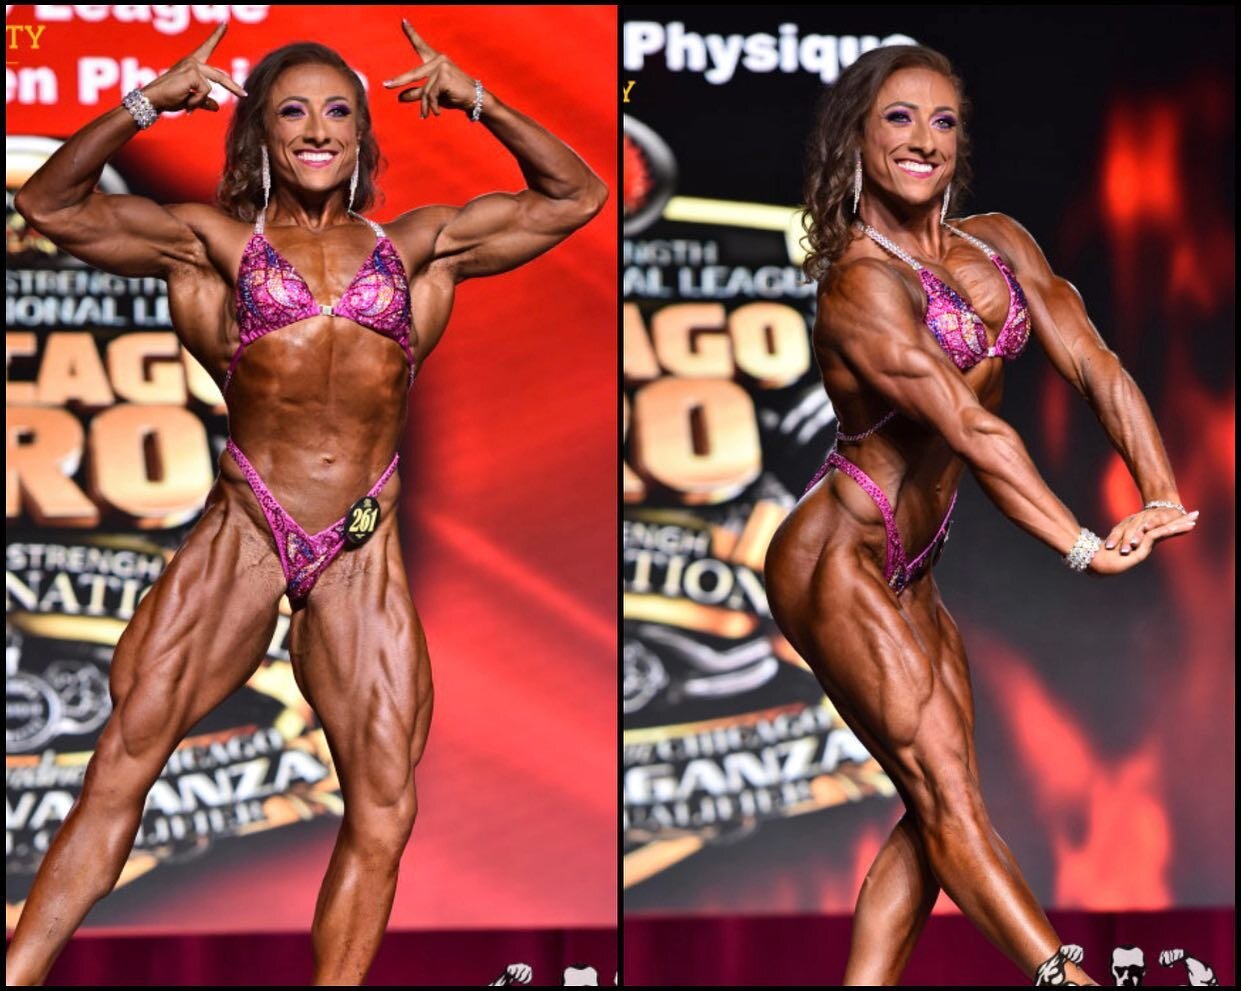 Shout to @emschub_ifbbpro on placing 12th in WPD at the stacked IFBB Chicago Pro this weekend in Atlanta. This is not the placing Emily was truly after, but she presented a SIGNIFICANTLY improved physique from her pro debut season last year.
➖
Emily 